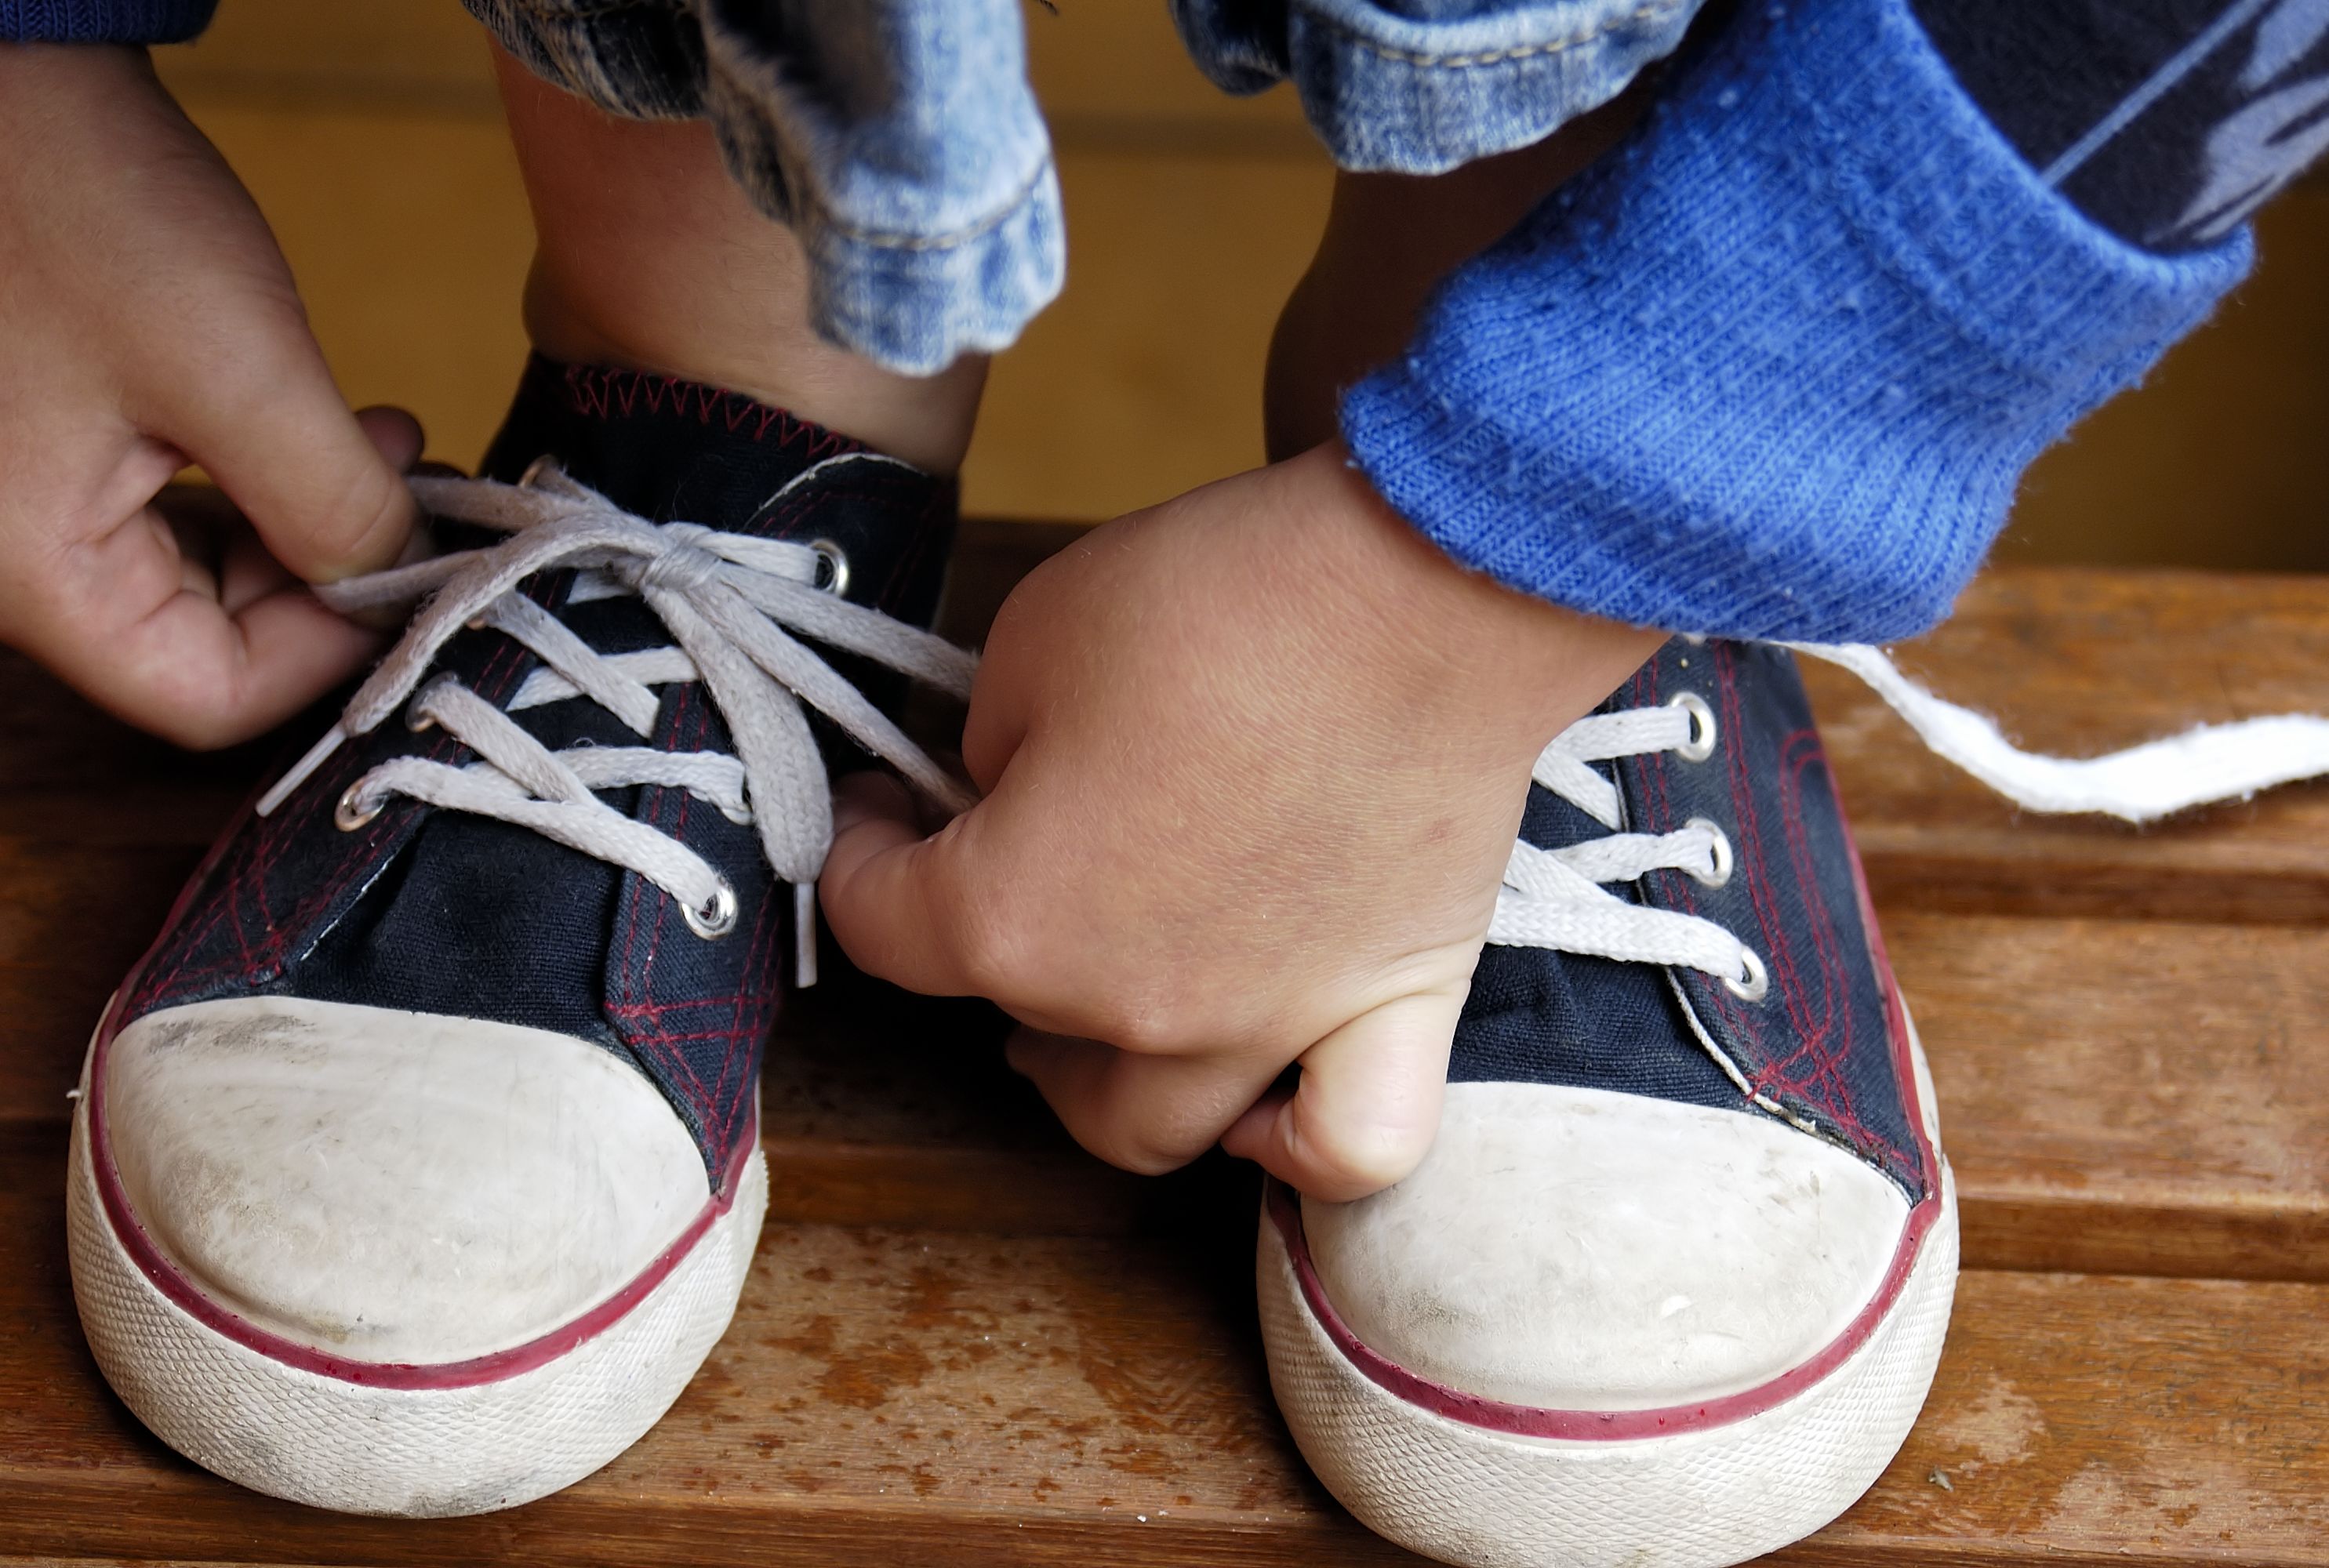 when does a child learn to tie their shoes